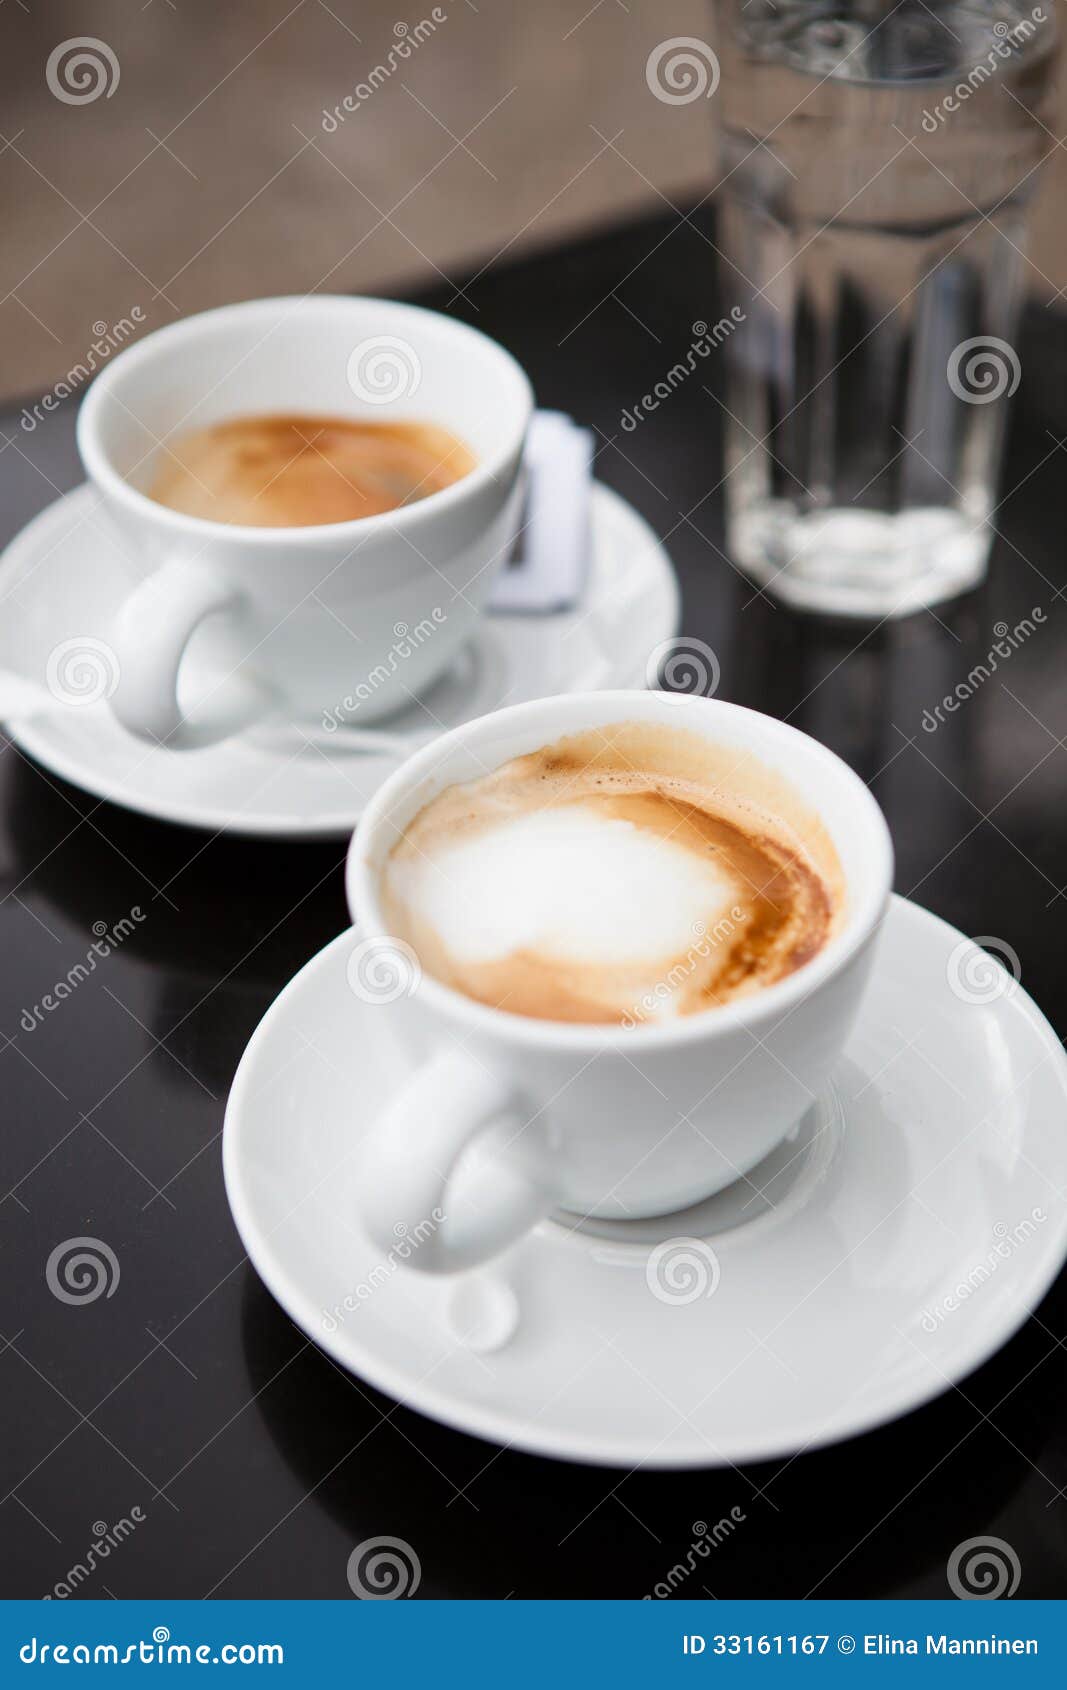 Two cups of coffee stock image. Image of cappuccino, froth ...